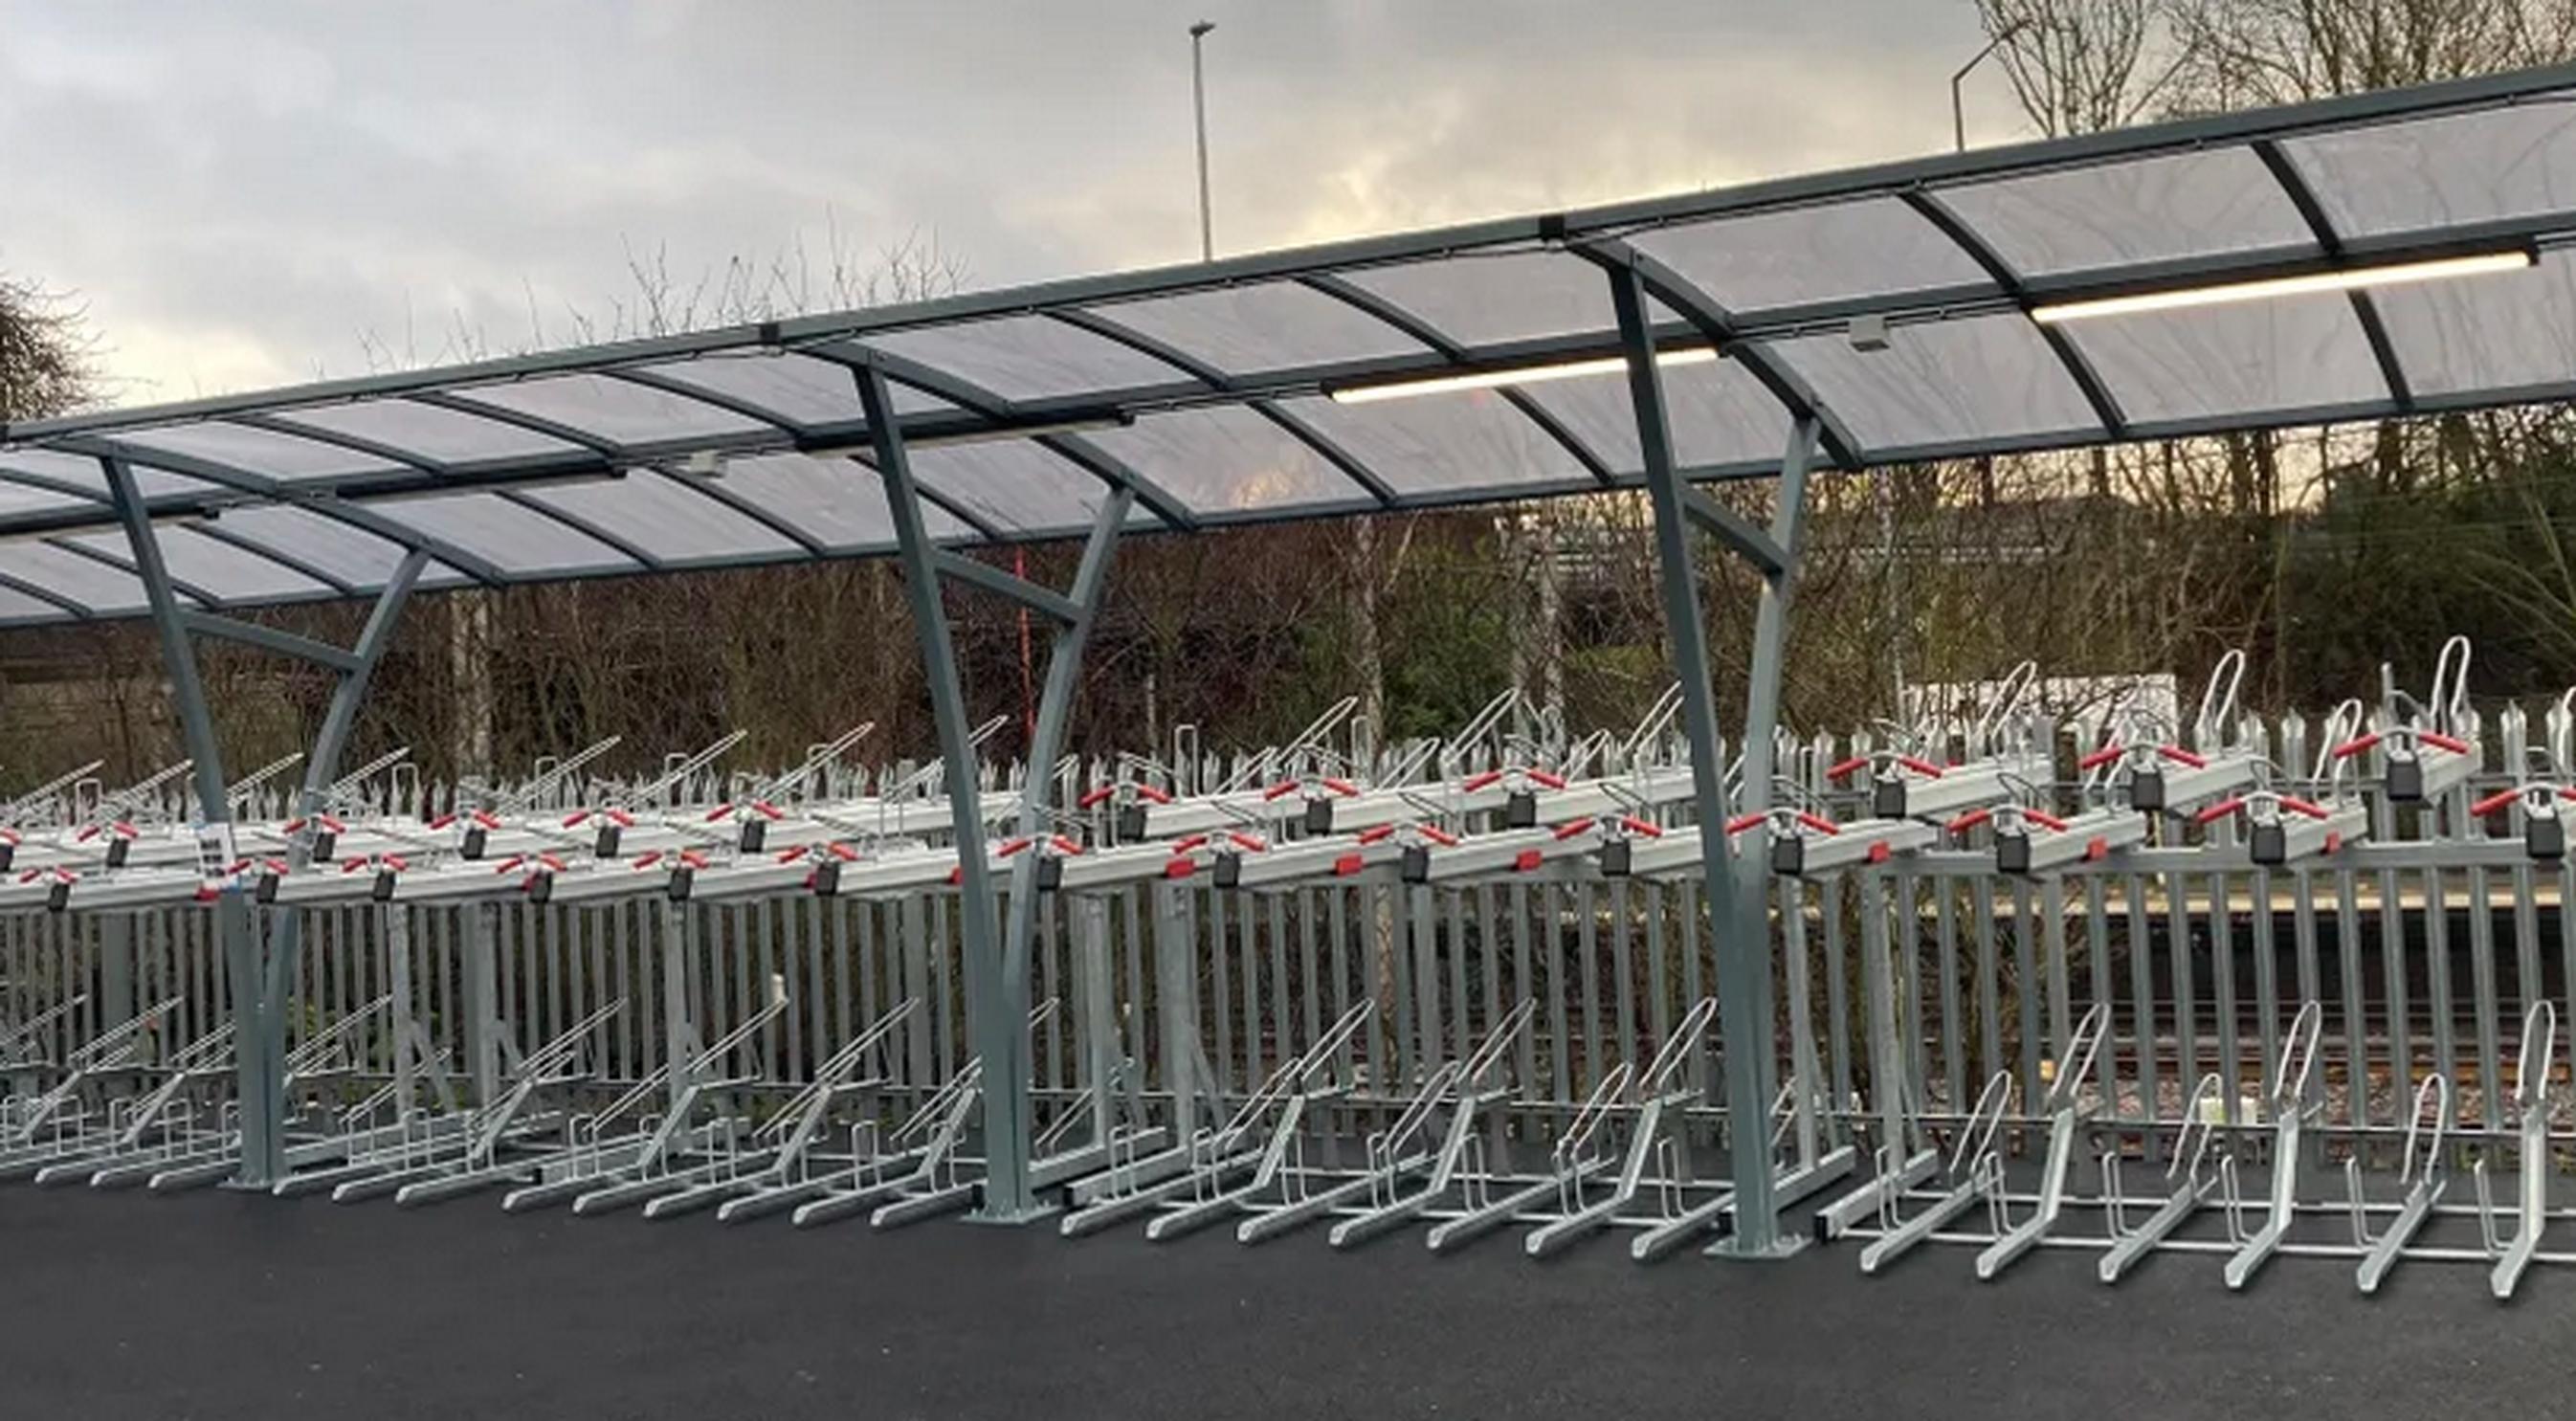 Cycle parking at Marks Tey station